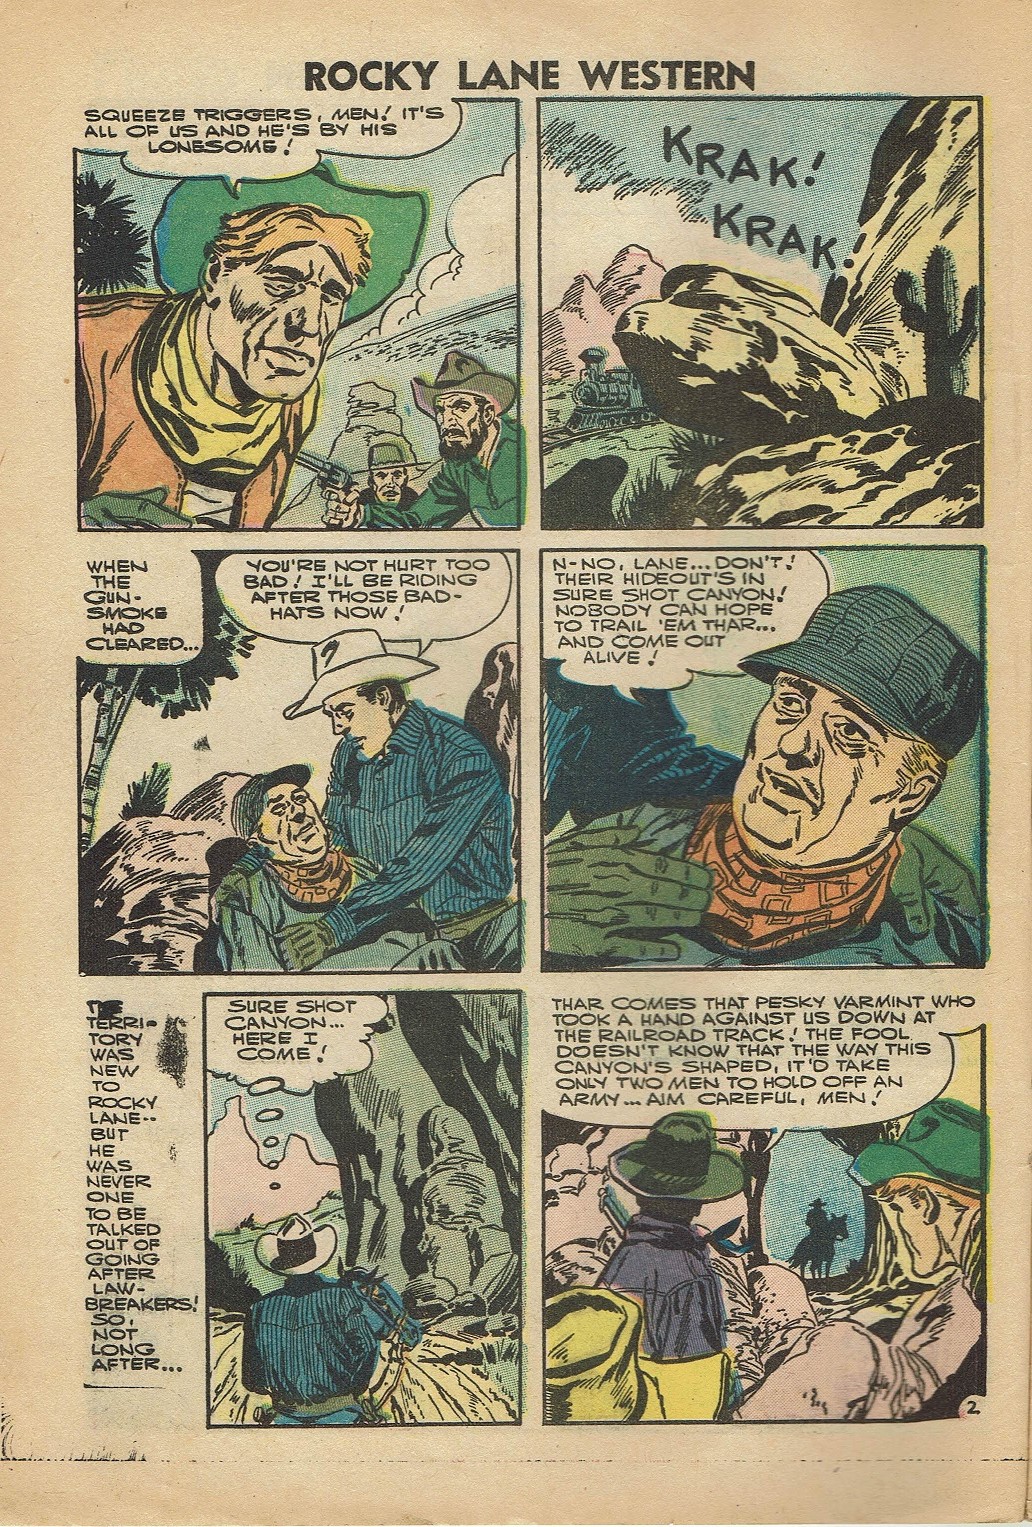 Rocky Lane Western (1954) issue 74 - Page 4